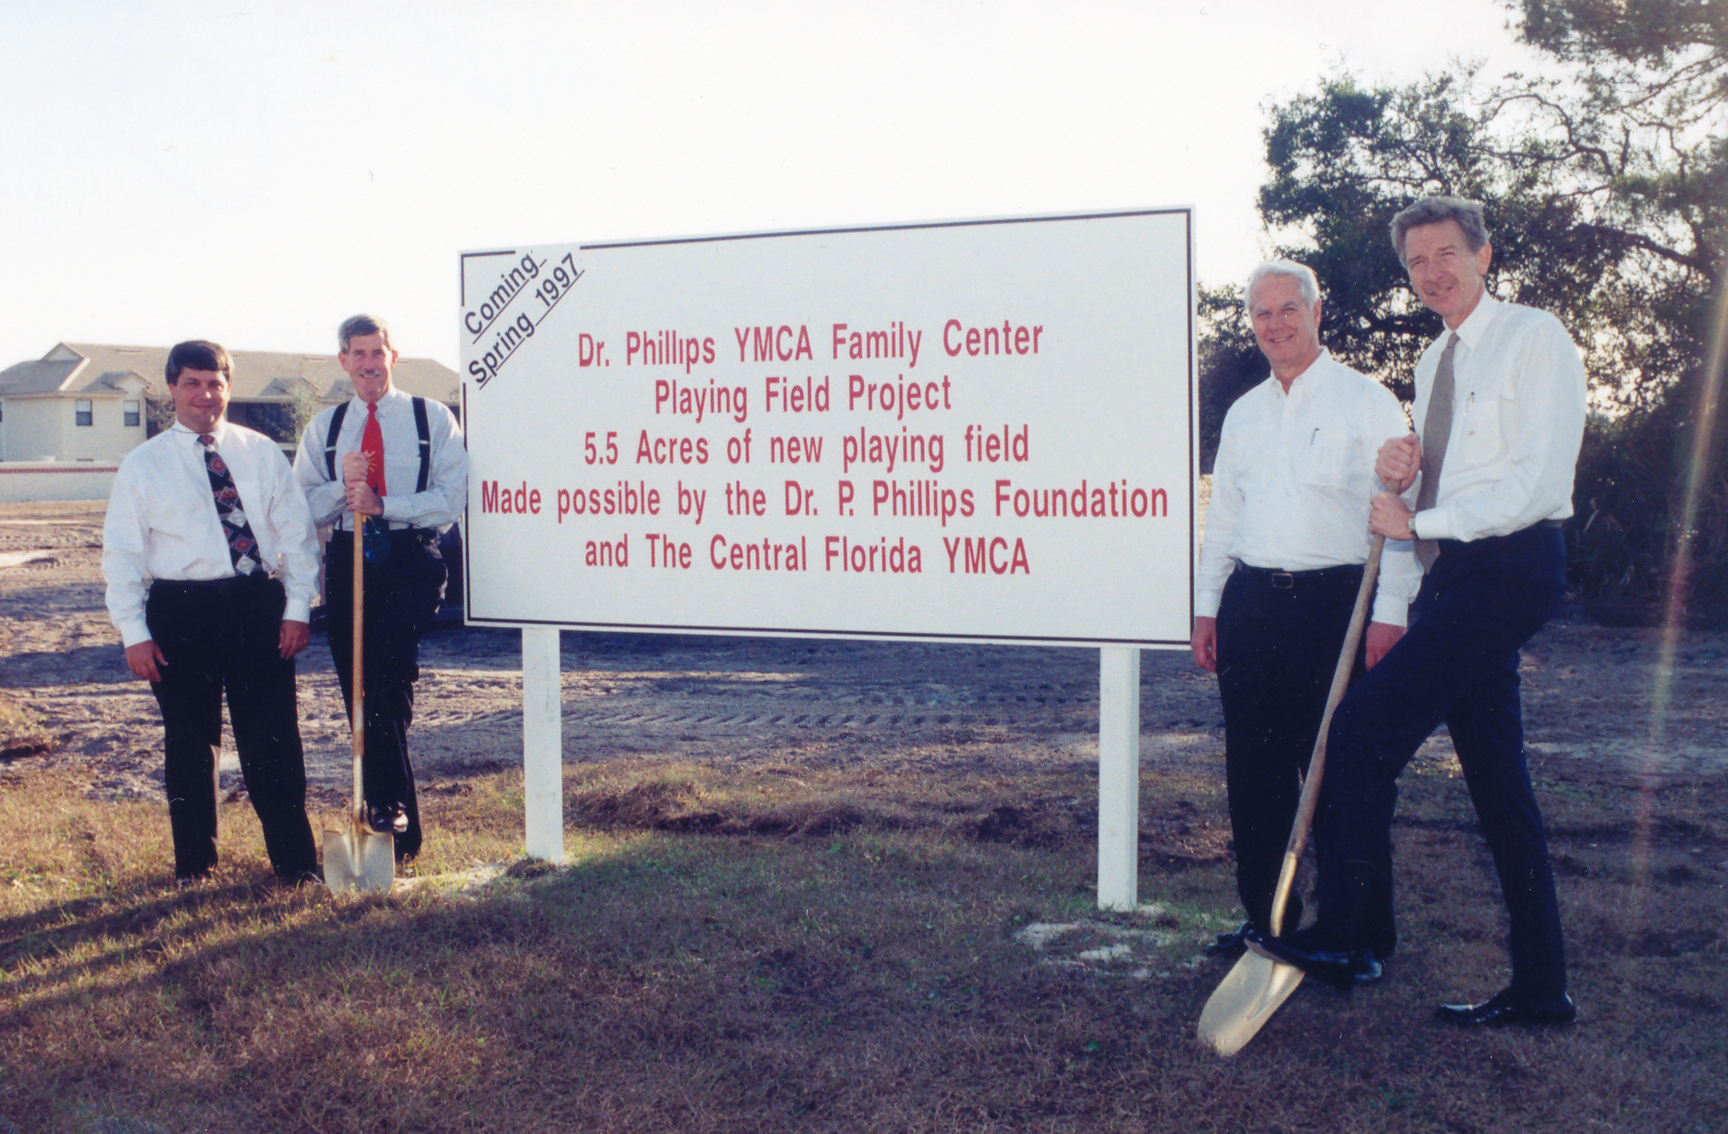 Jim Ferber, right, and other YMCA and Dr. Phillips leaders at a 1996 groundbreaking for the Dr. Phillips YMCA Family Center.